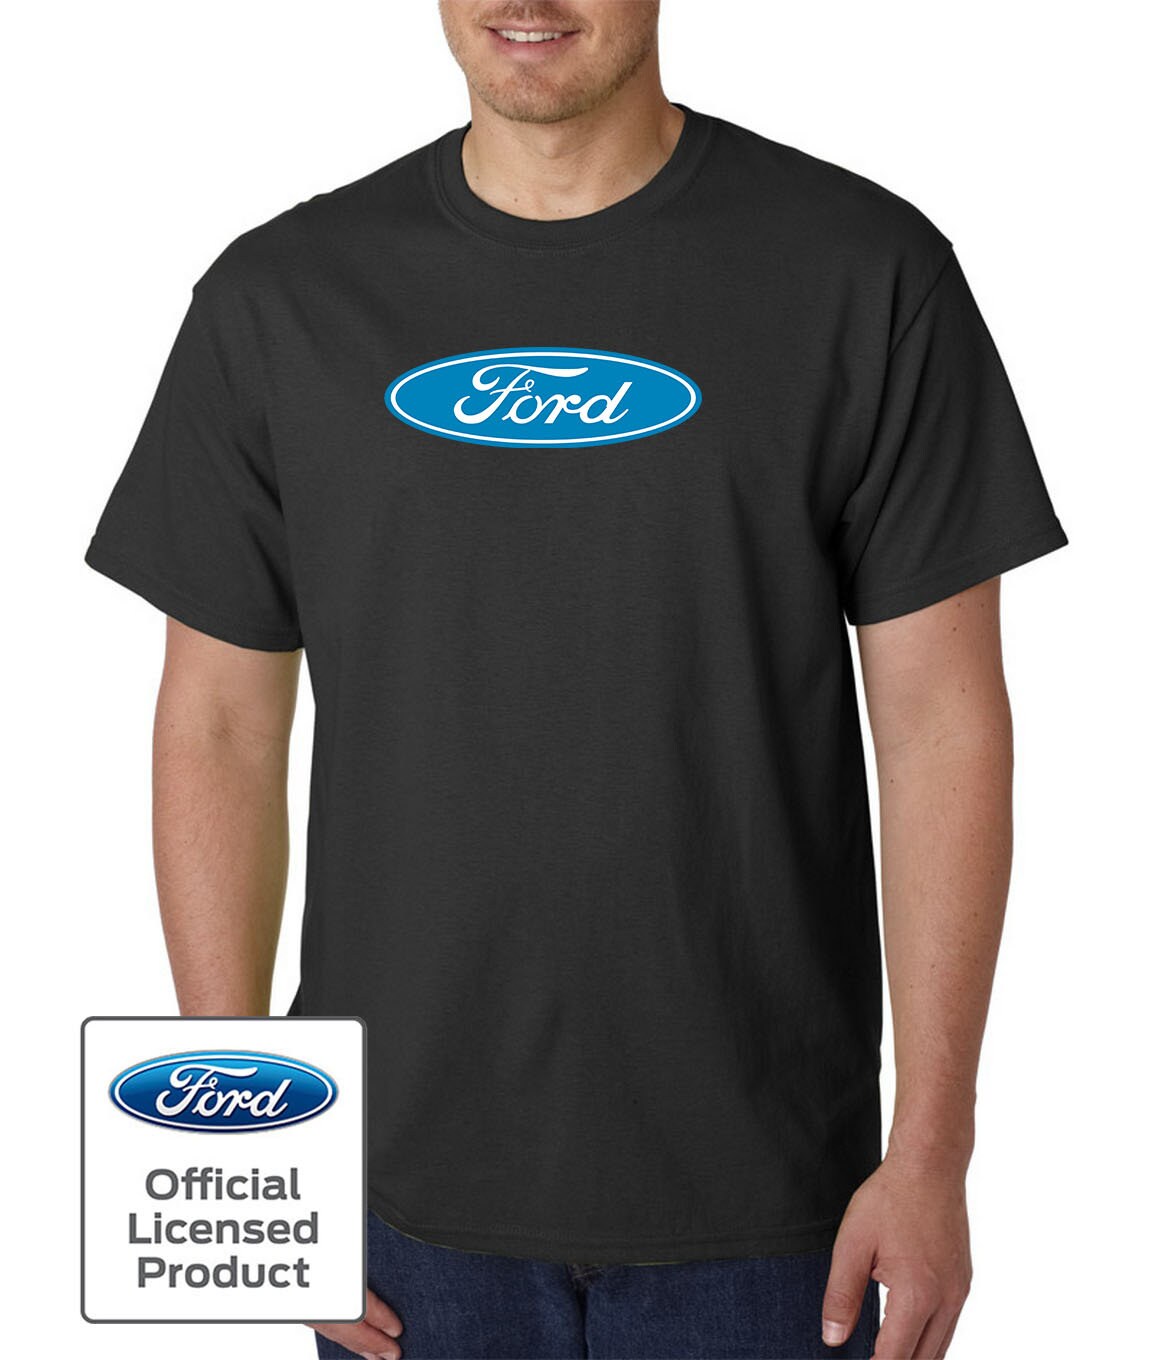 Classic FORD Oval Logo T-shirt F-150 Mustang 4x4 Authentic | Etsy